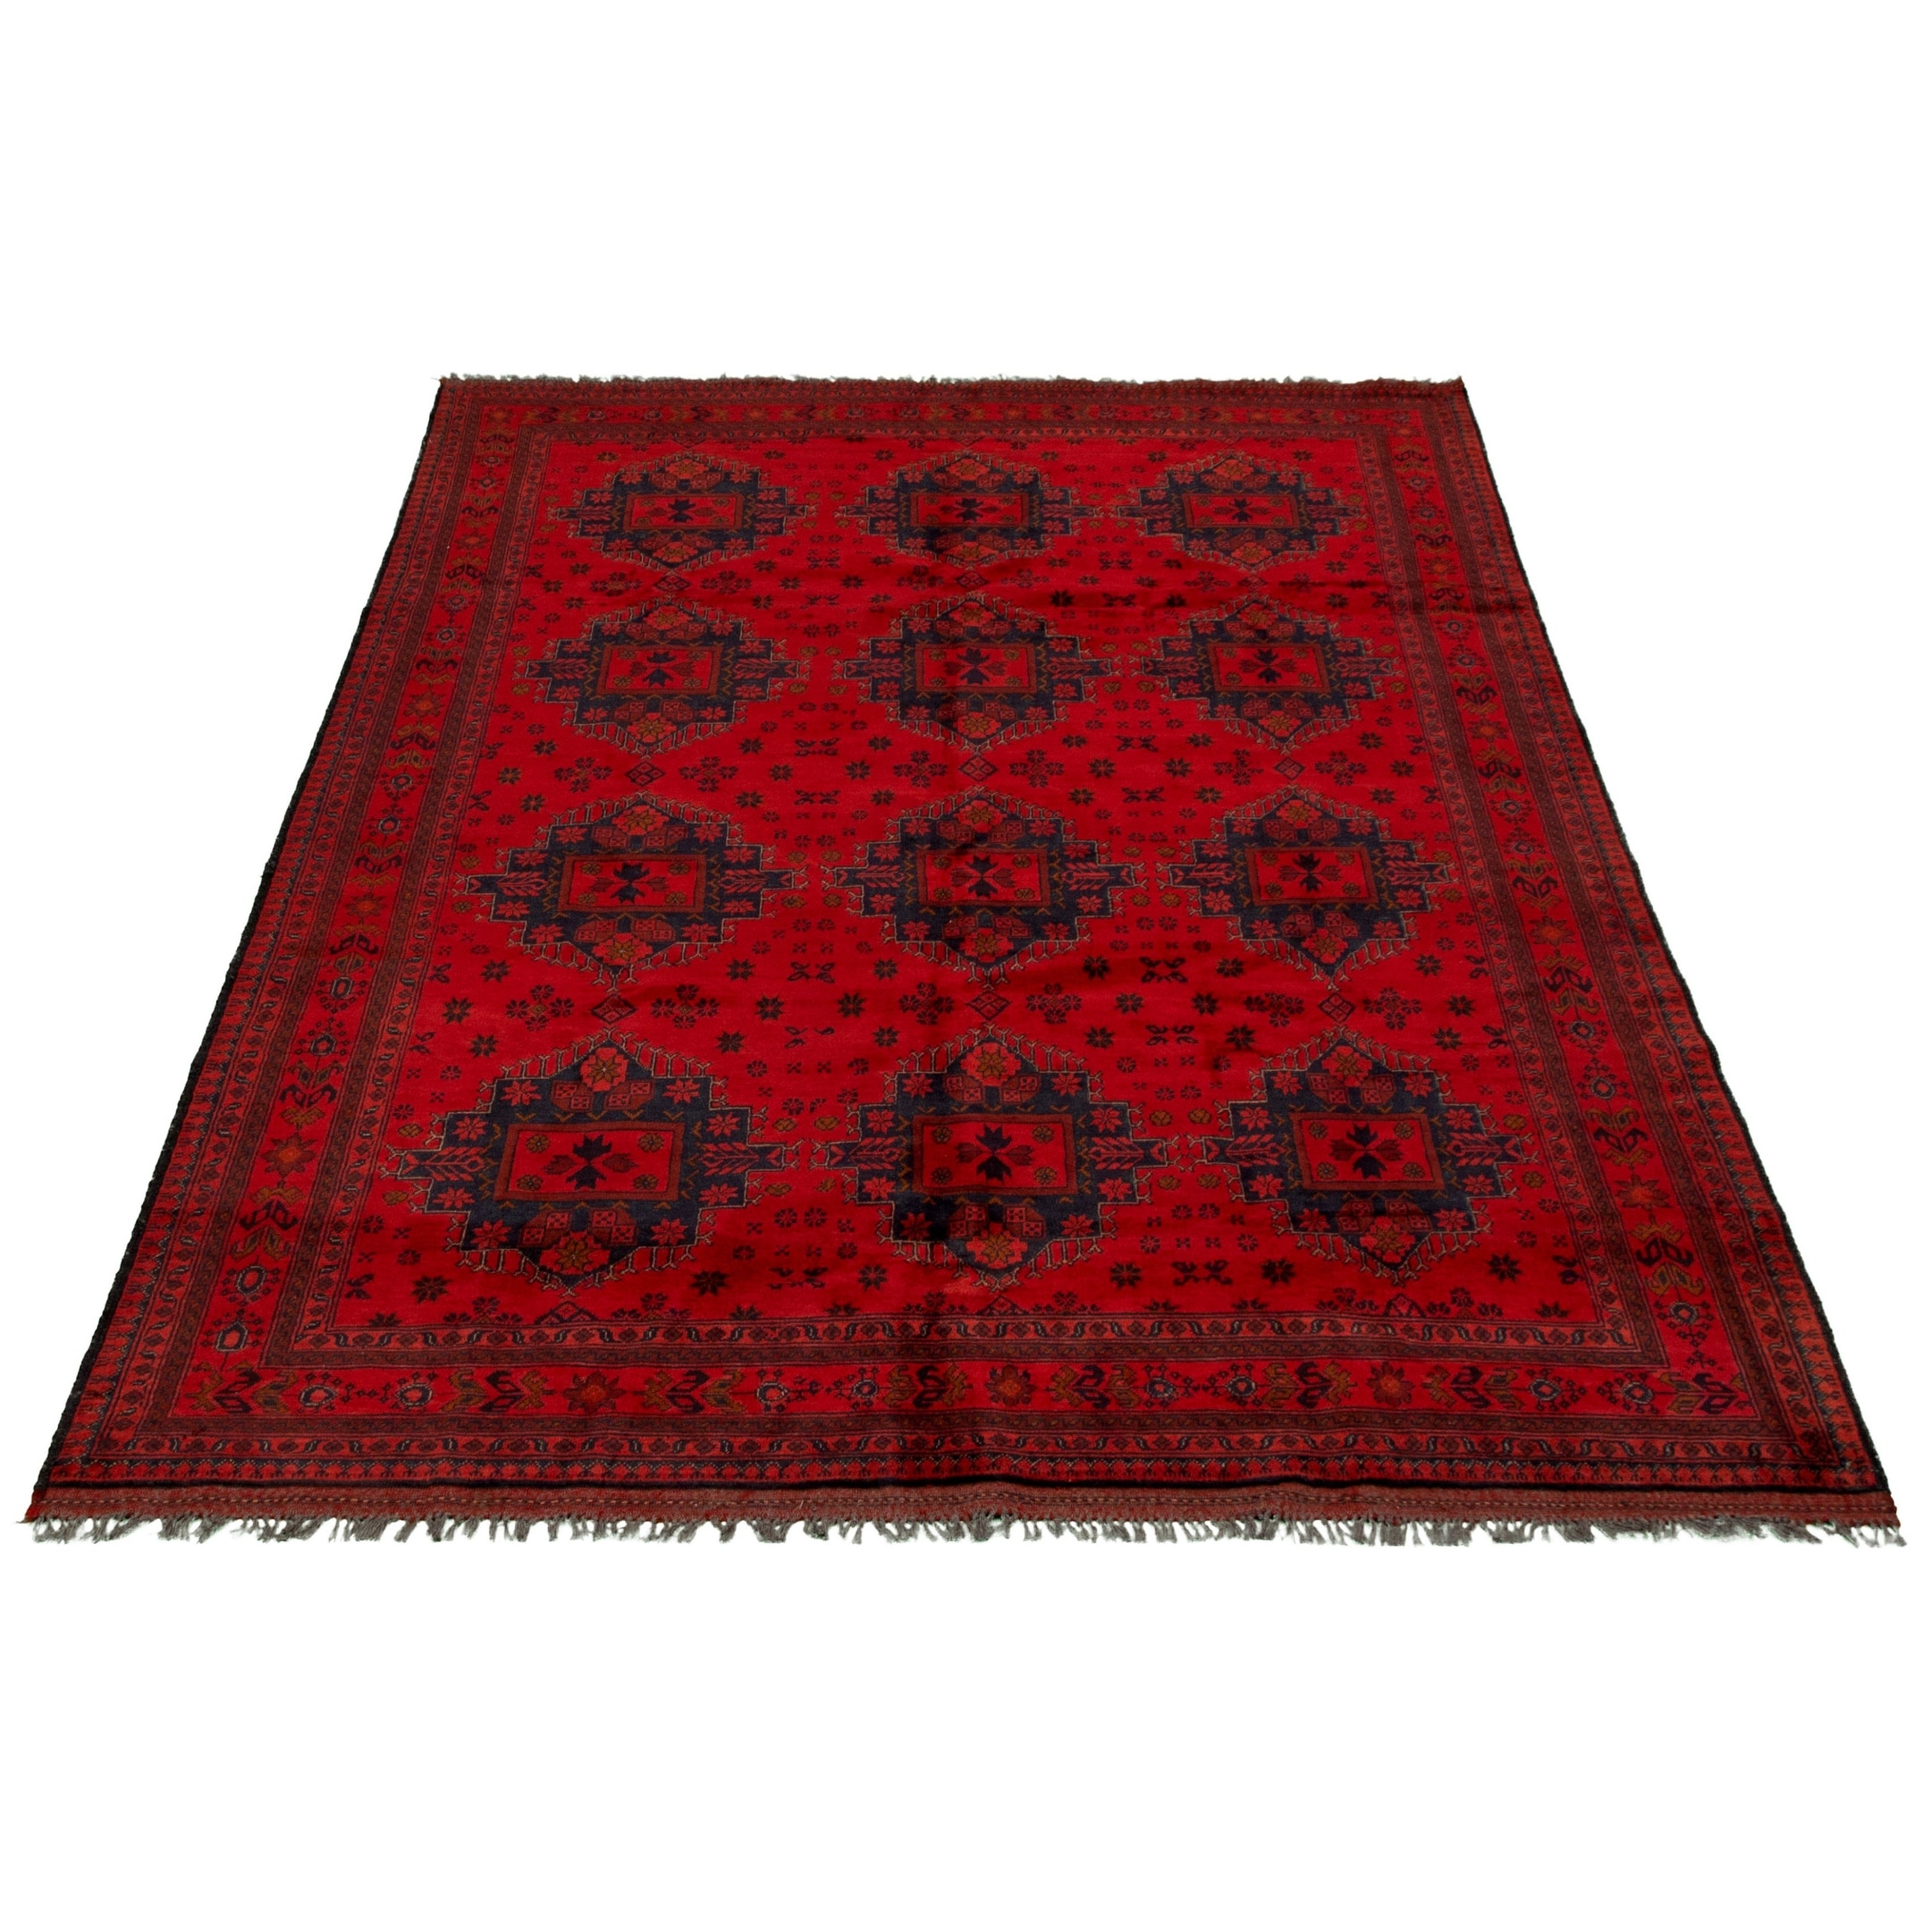 eCarpet Gallery Area Rug for Living Room Hand-Knotted Wool Rug 357250 Finest Khal Mohammadi Bordered Red Rug 5'7 x 7'8 Bedroom 